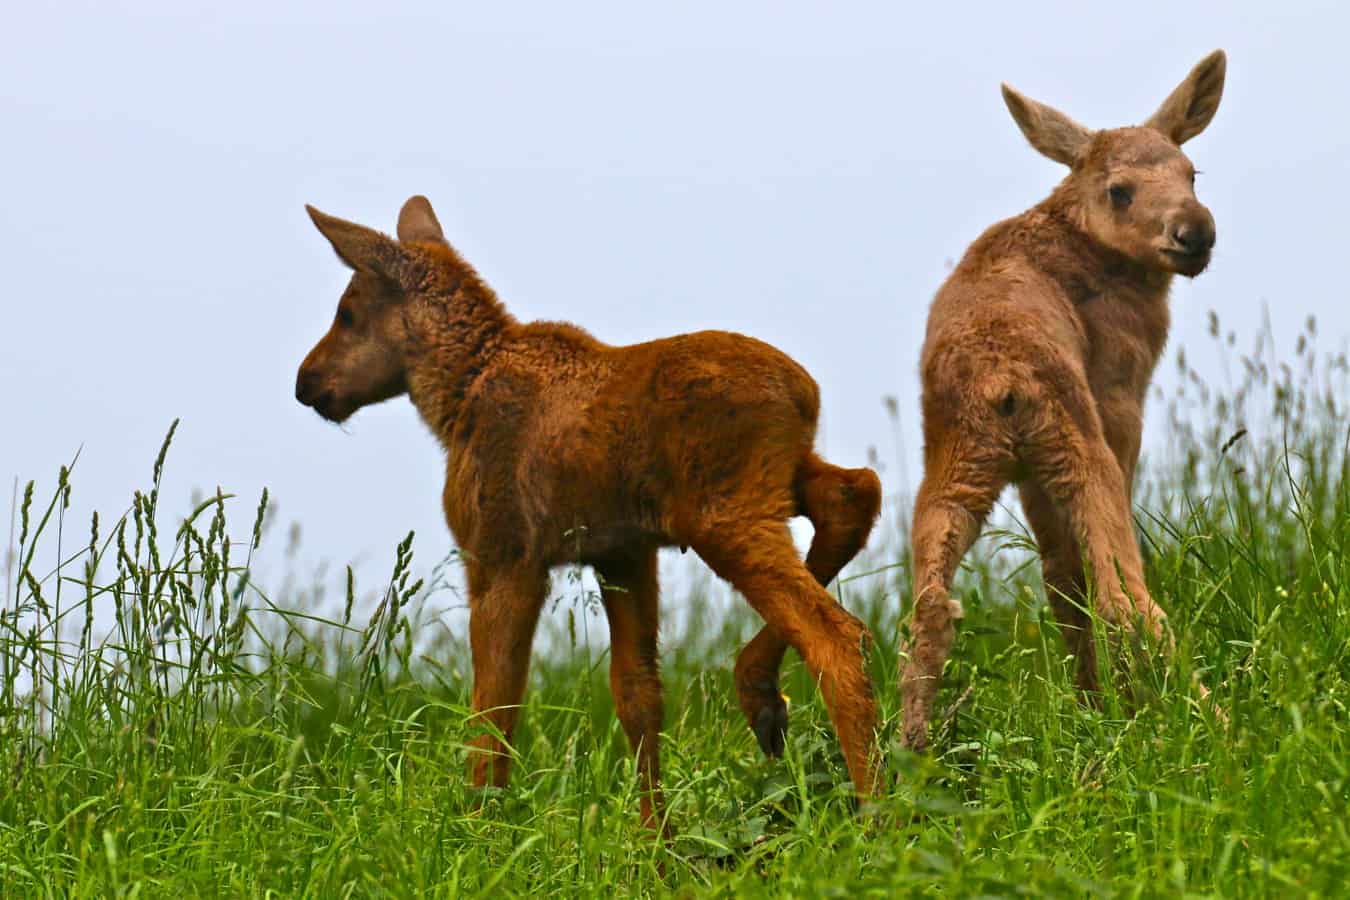 Baby Moose Twins at Wragarden Farm in Falkoping, Sweden